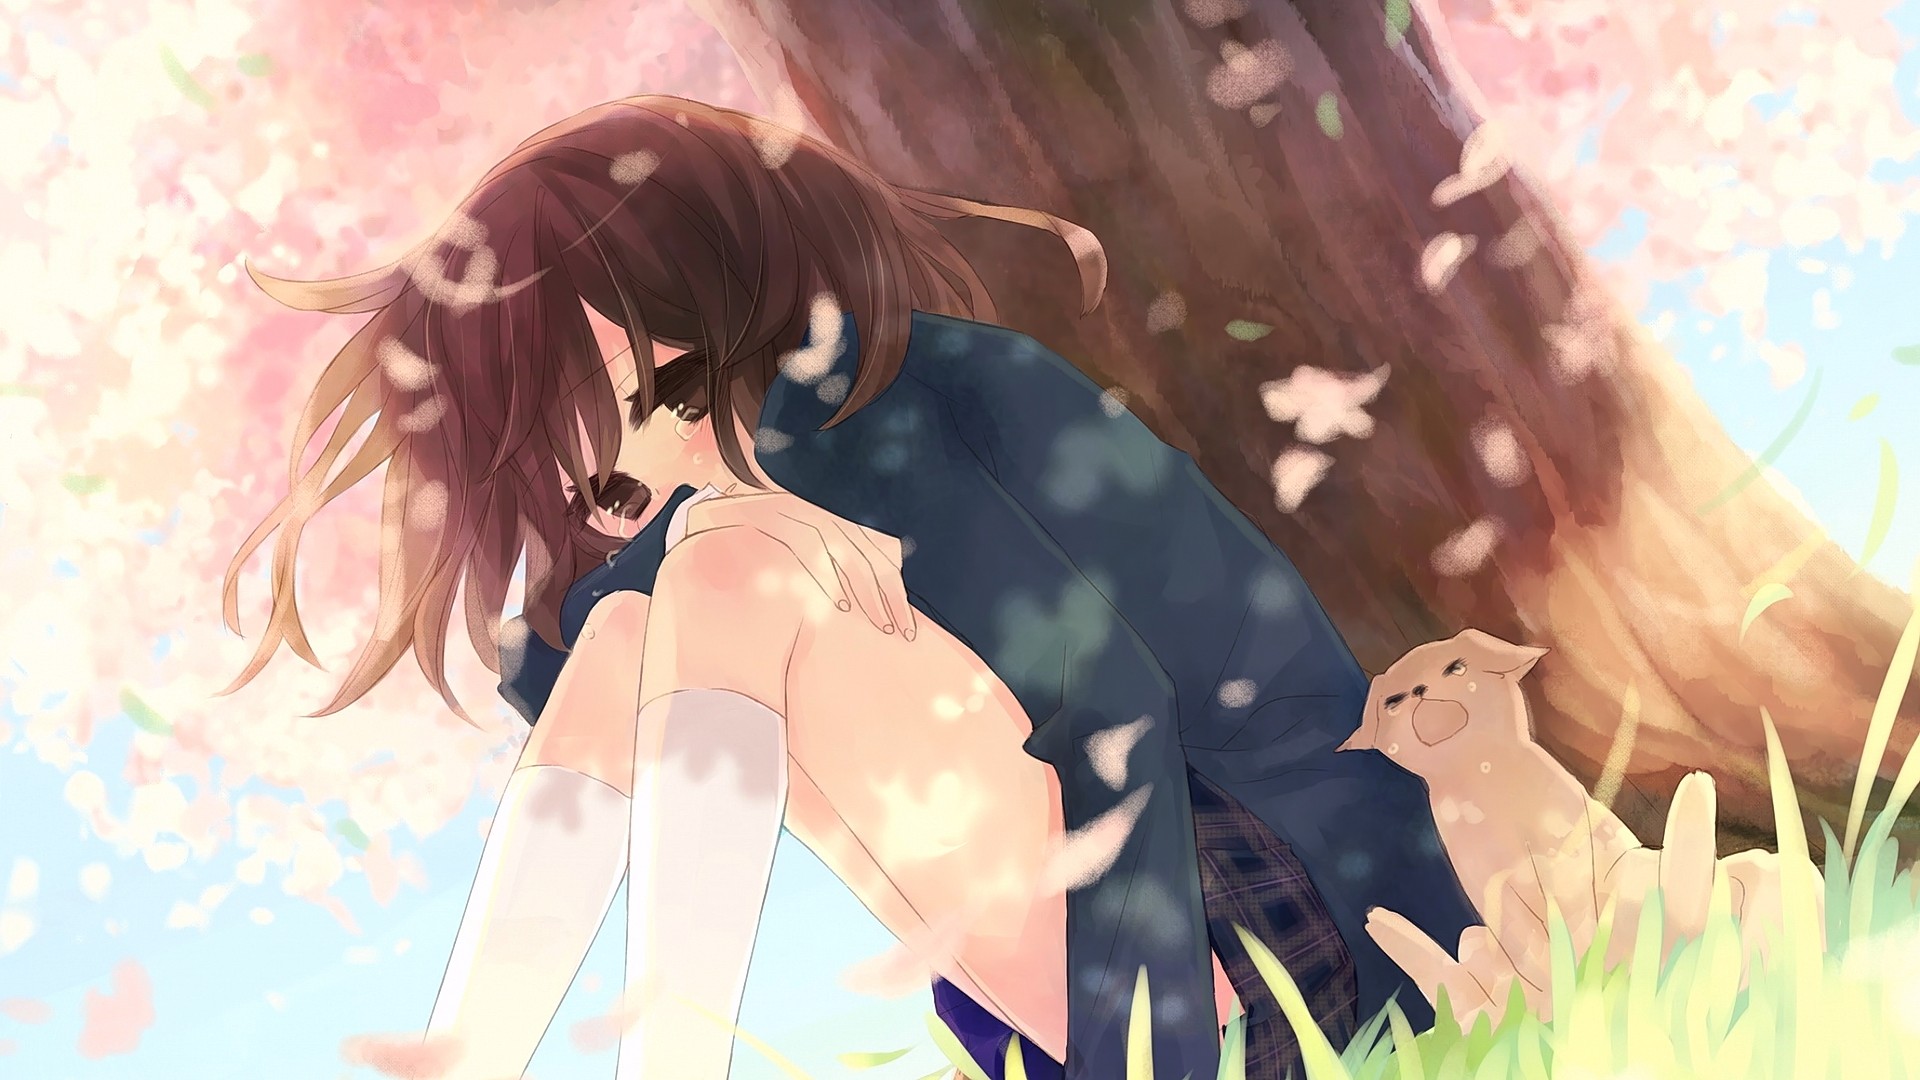 Anime 1920x1080 anime anime girls brunette long hair cherry blossom brown eyes crying sadness looking at viewer sad tears thighs legs socks women outdoors